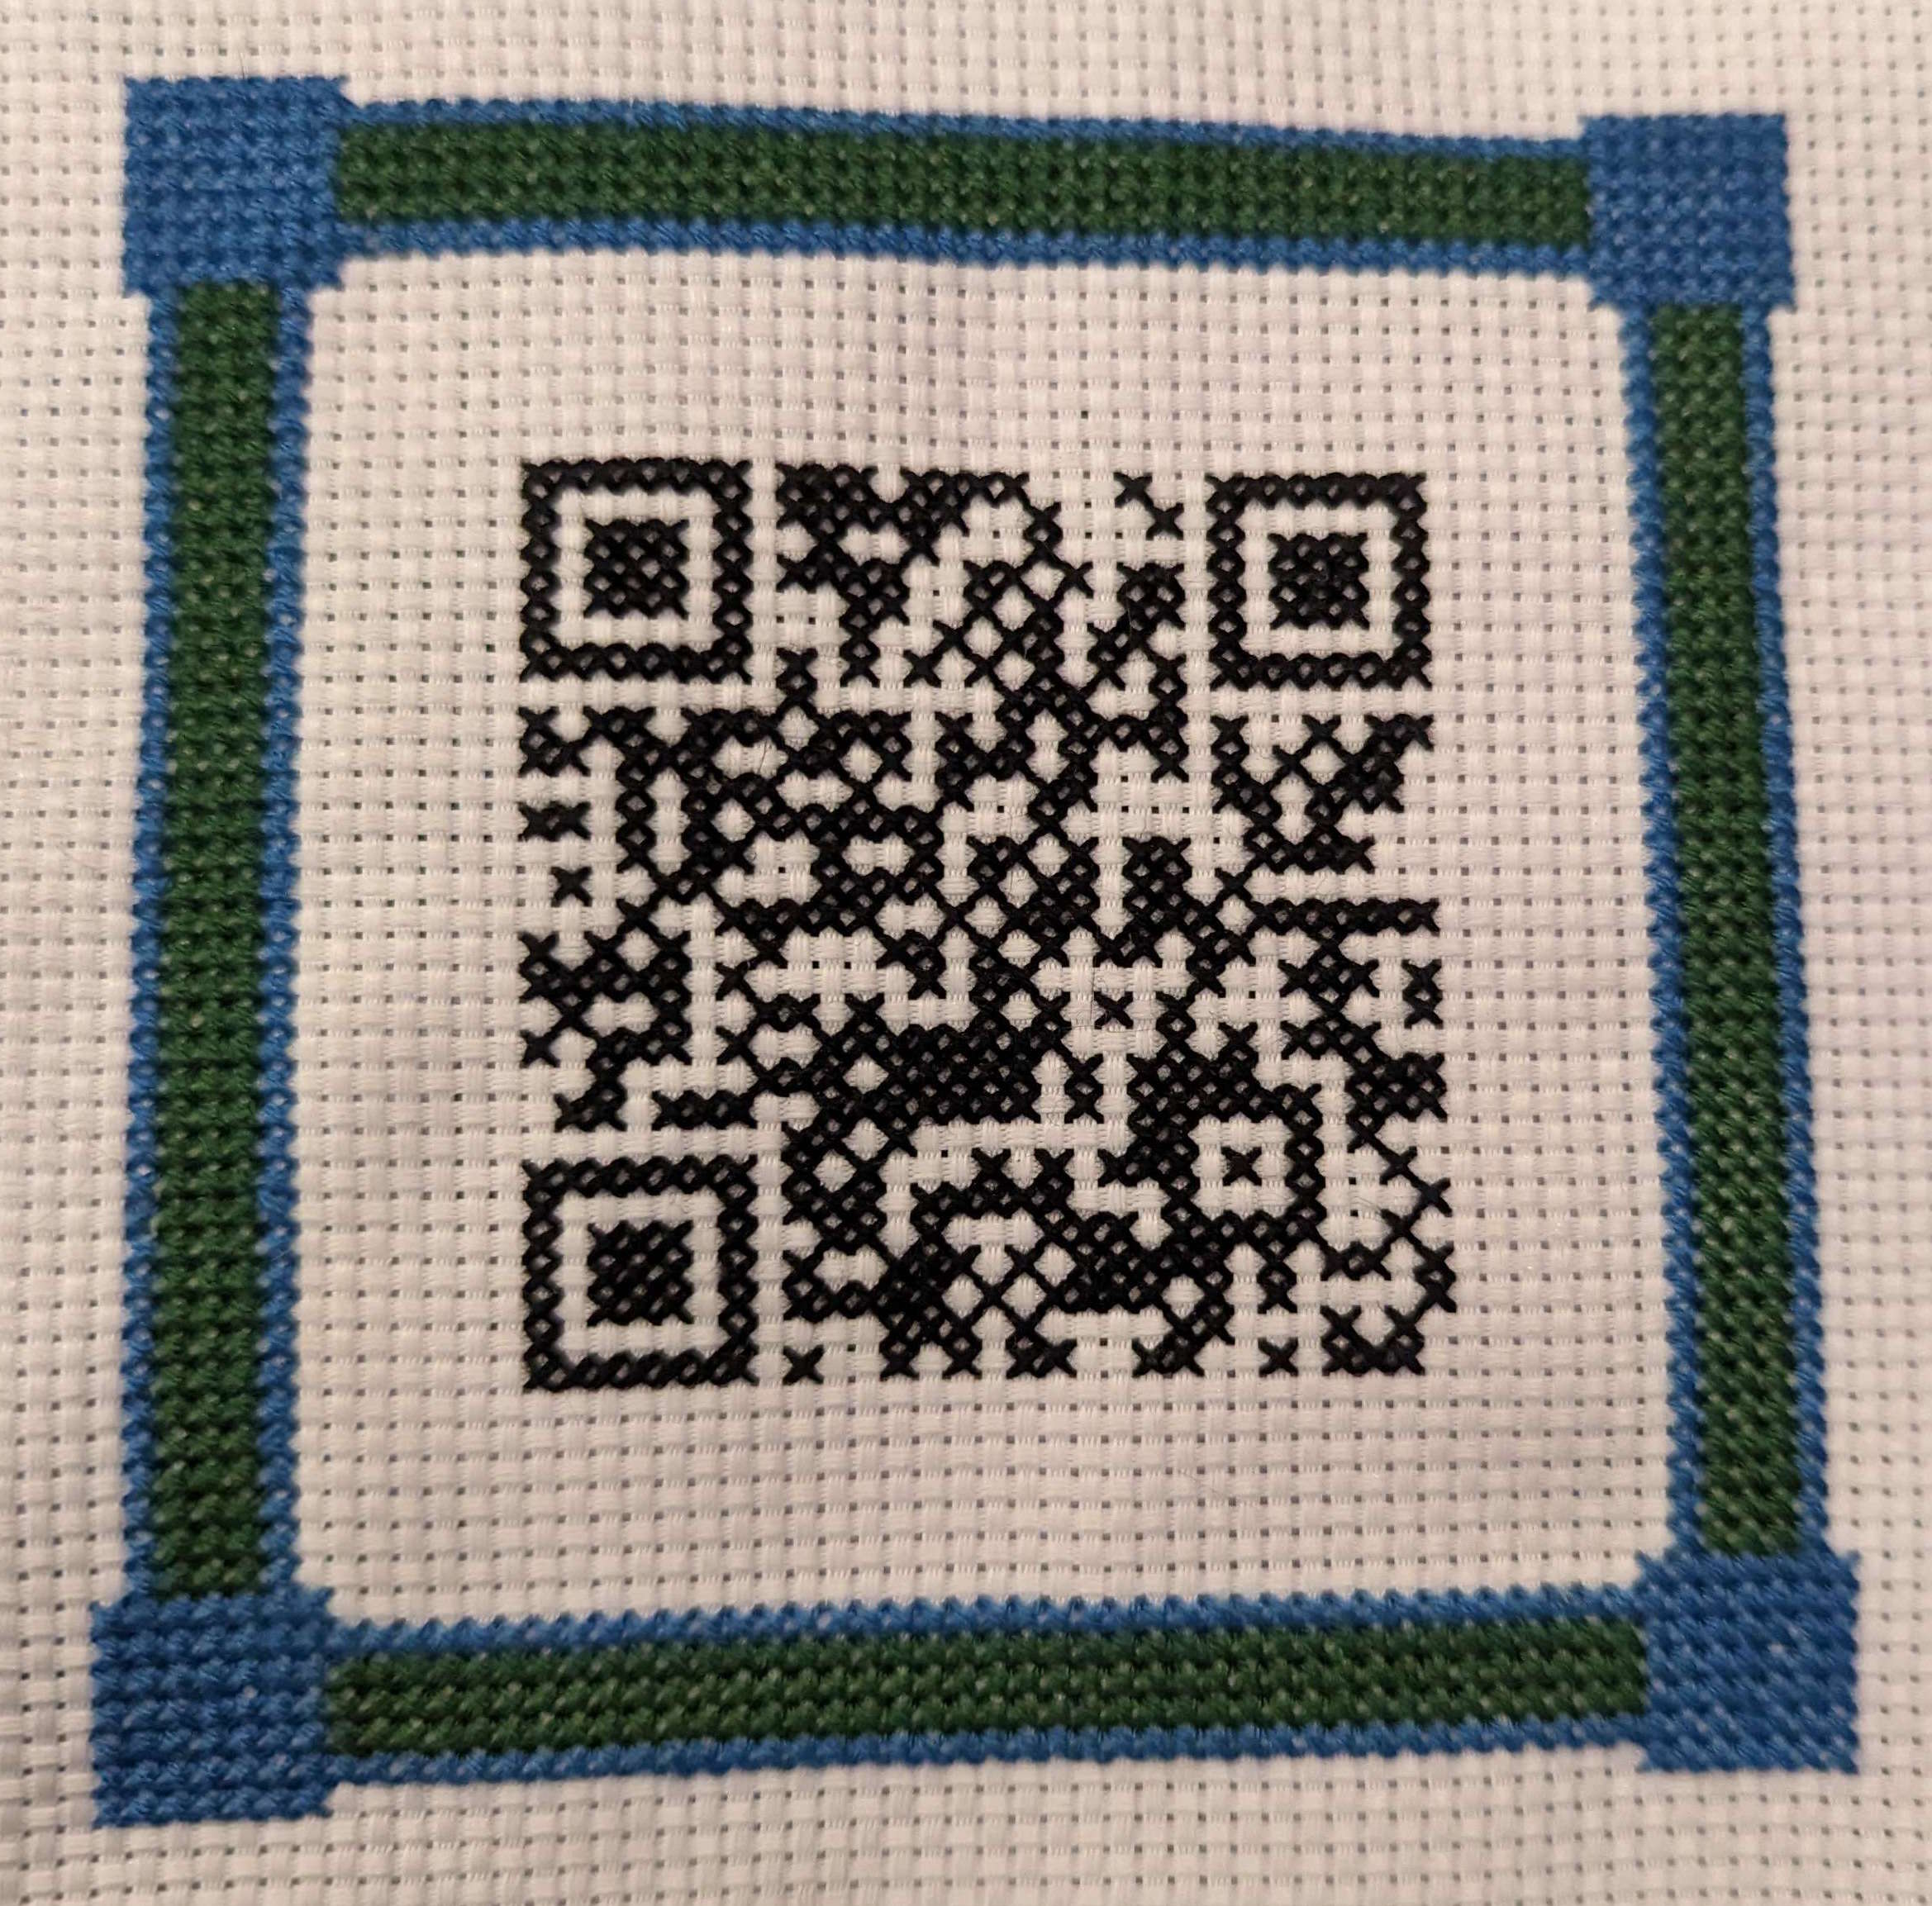 cross-stitch of a QR code of a wifi network and password. The QR code has a solid blue and green decorative border.